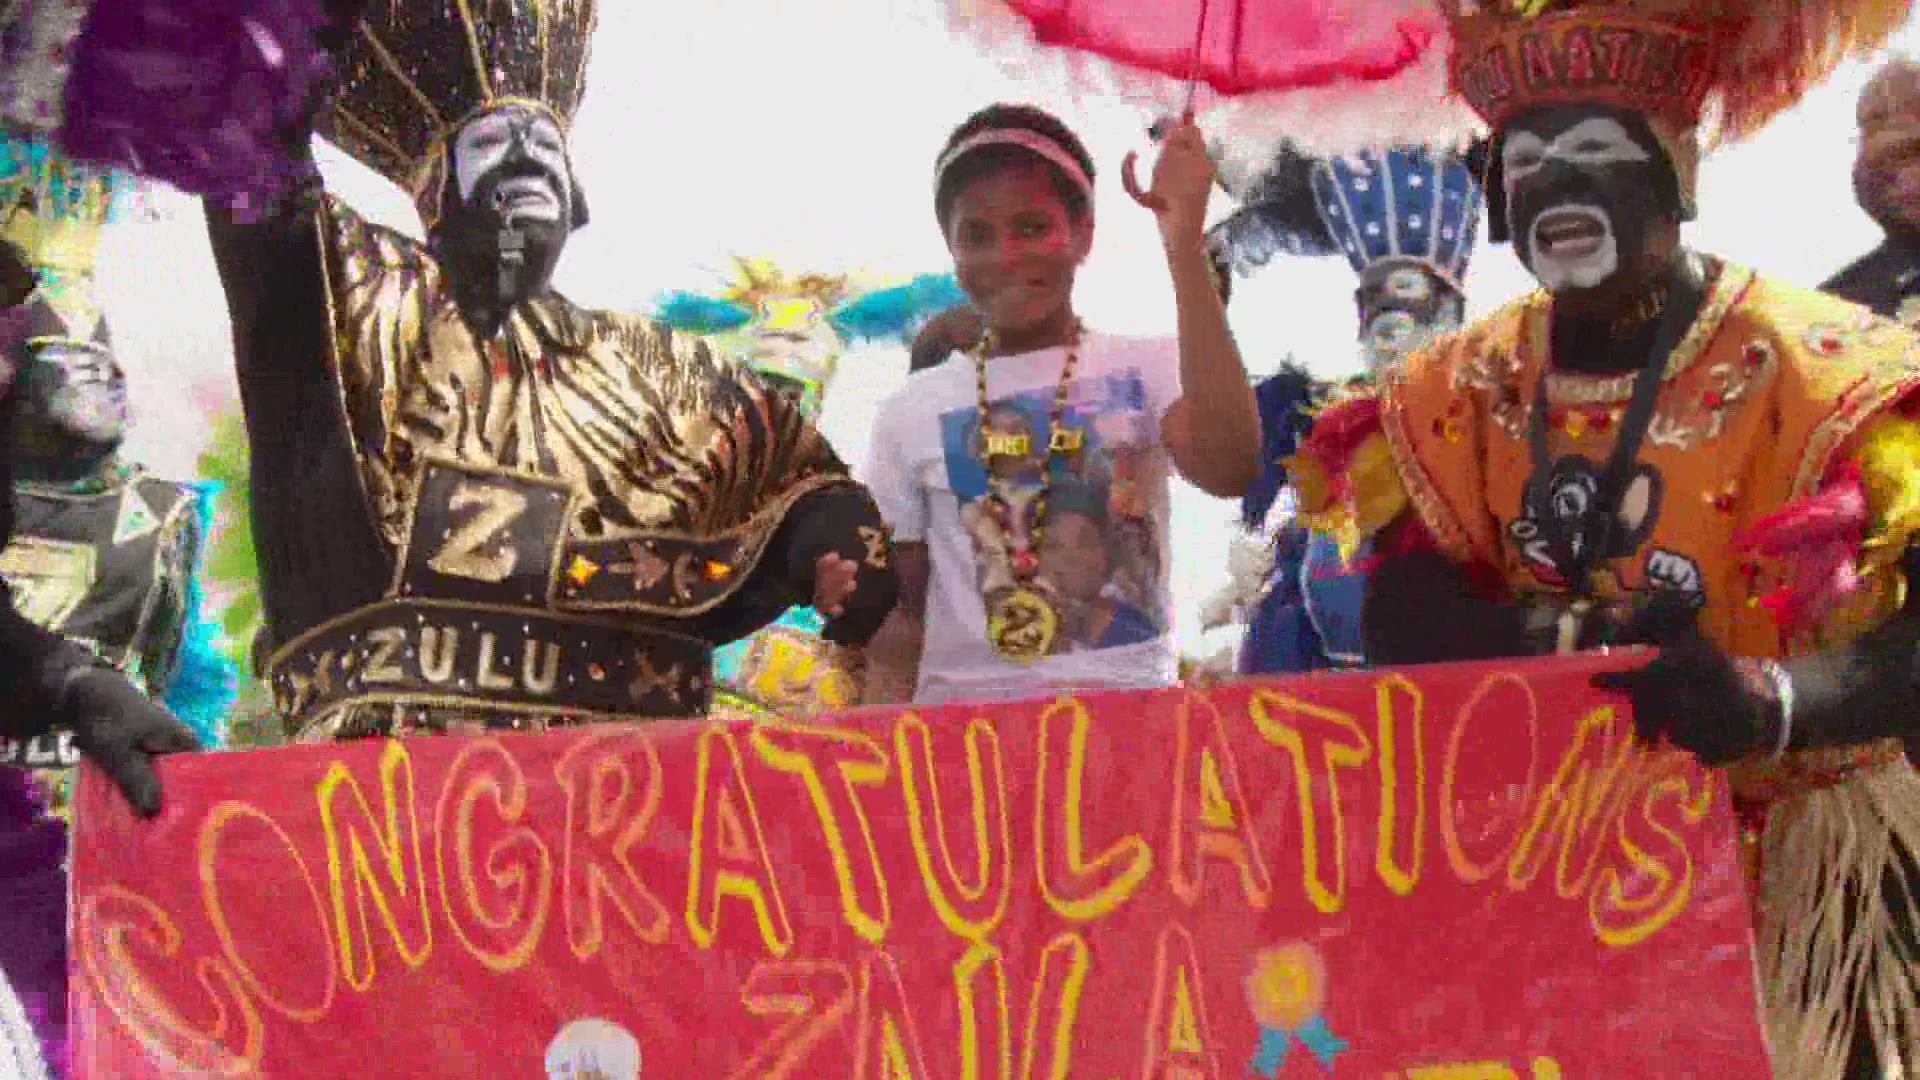 Neighbors, friends and family celebrated 14-year-old Zaila Avant-garde with a second line and parade after being crowned champion National Spelling Bee champion.